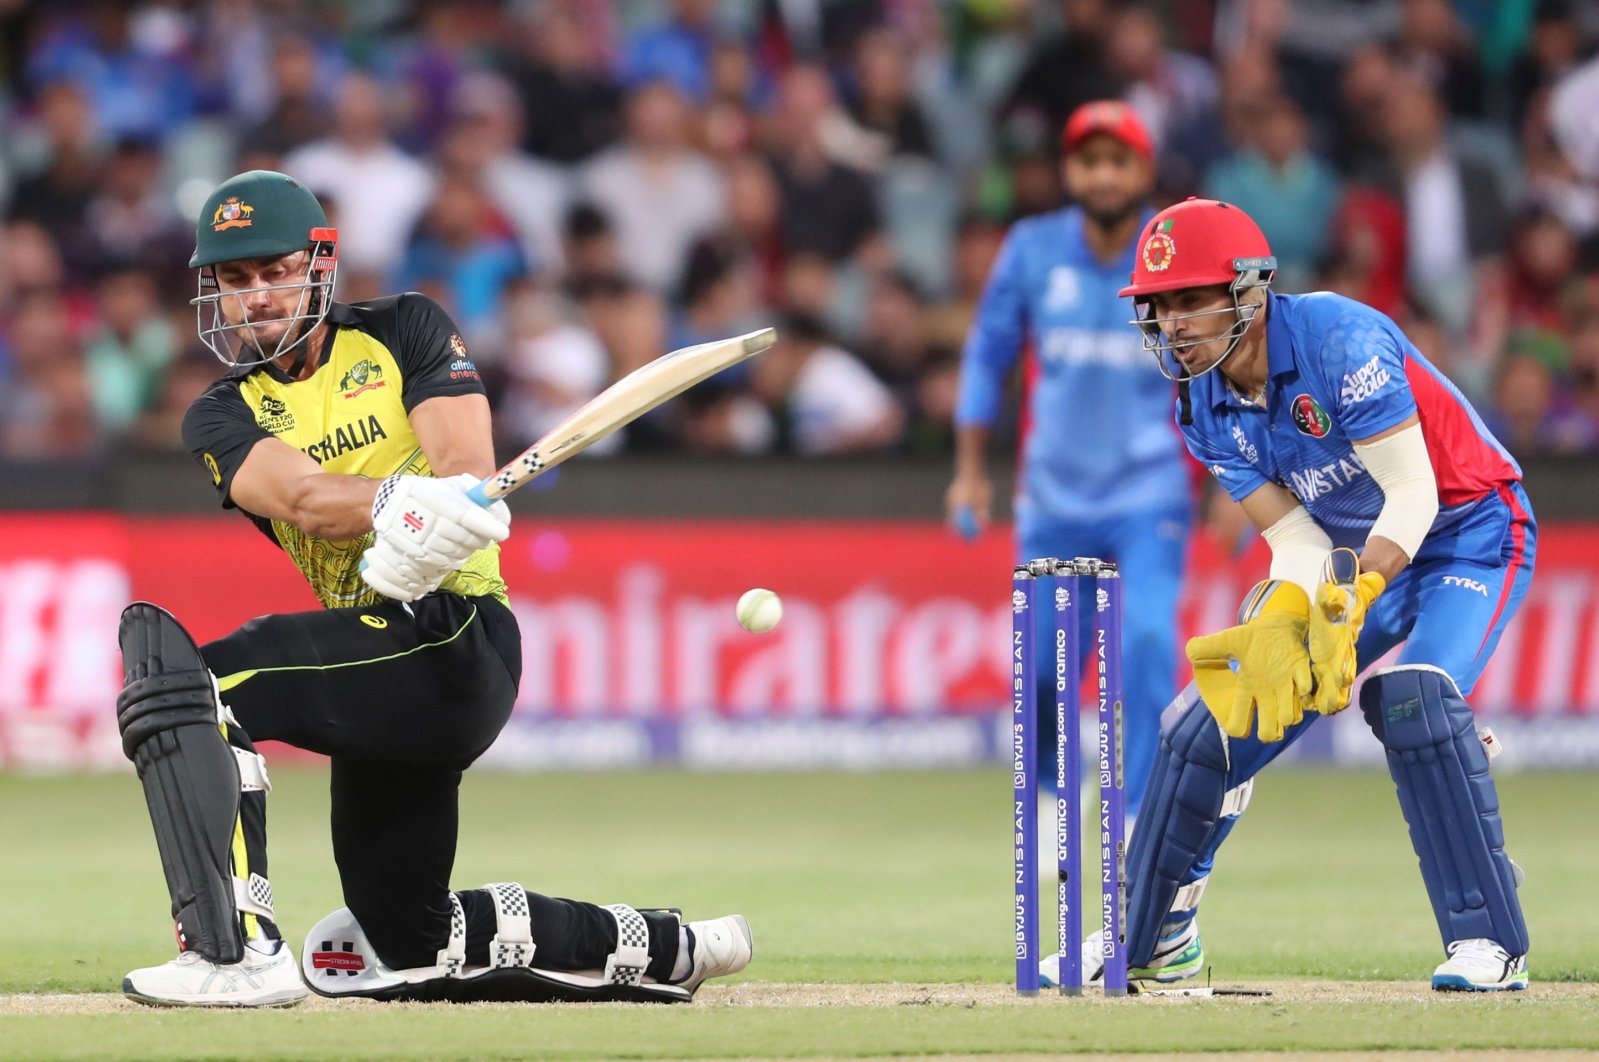 Australia&#039;s Marcus Stoinis and Afghanistan&#039;s Rahmanullah Gurbaz during an ICC Men&#039;s T20 World Cup match at Adelaide Oval, Adelaide, Australia, Nov. 4, 2022. (Getty Images Photo)